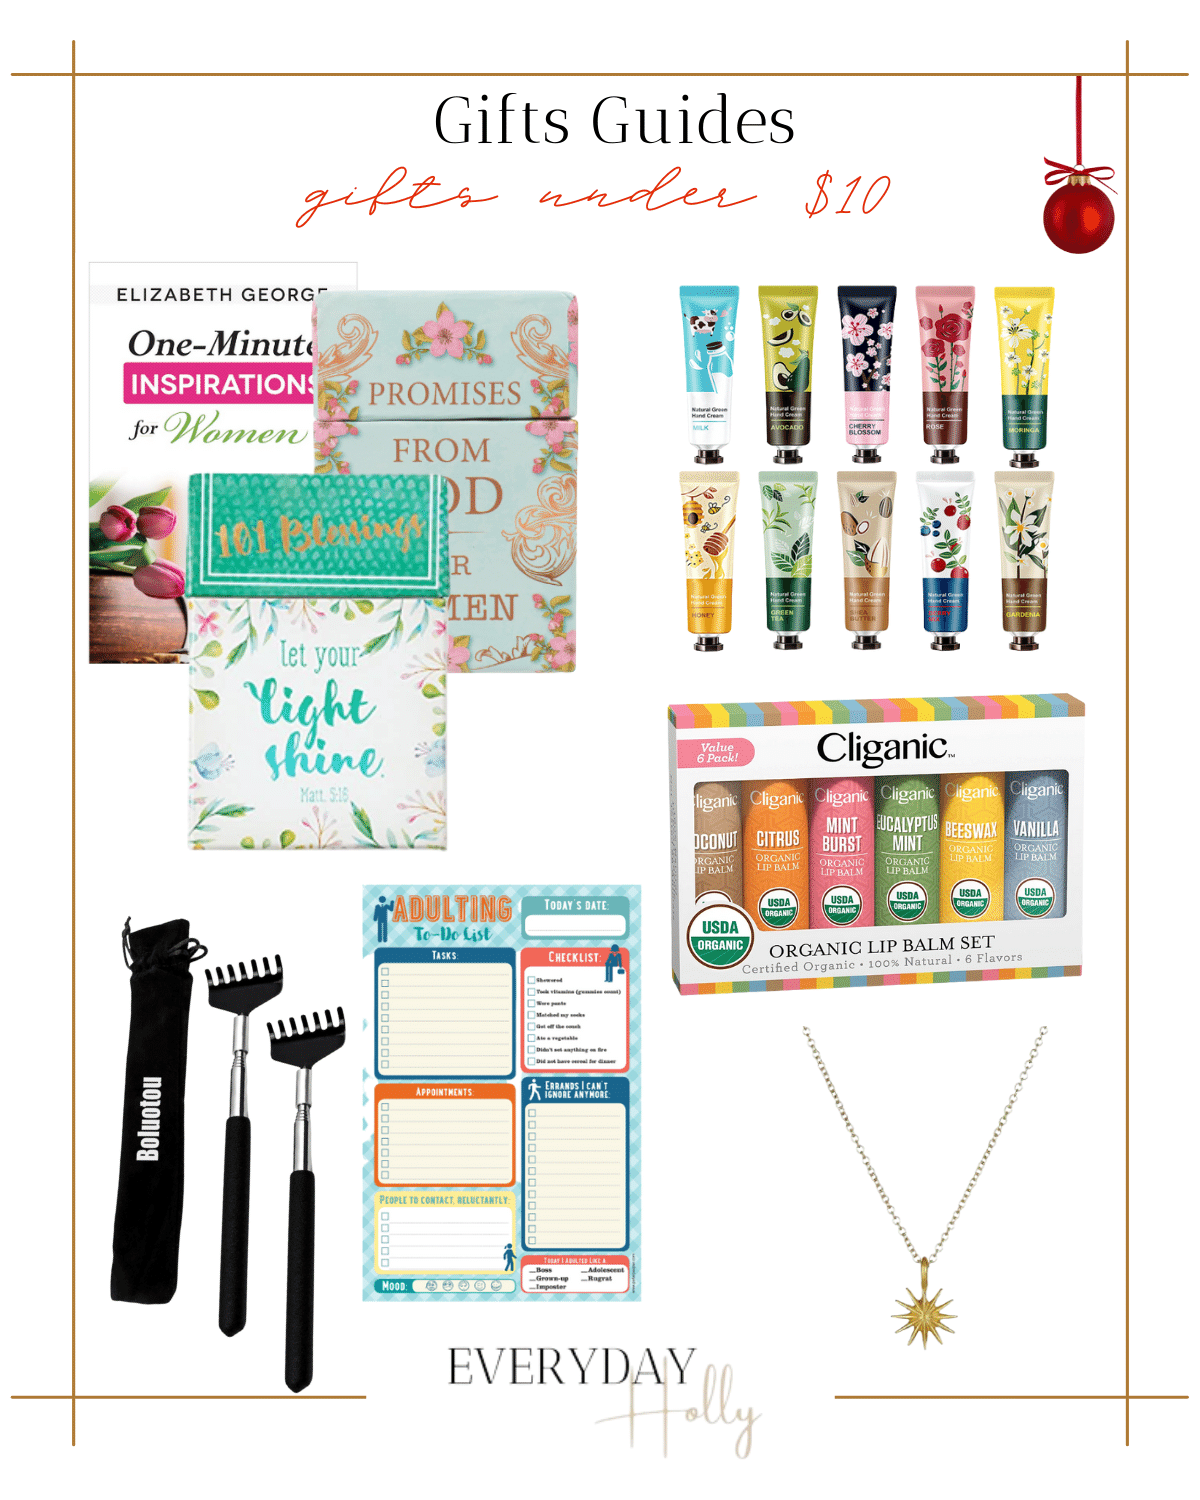 gifts under $10, gift guide for cheap, daily women devotionals, lotion kit, organic lip balm set, back scratcher, adulting to do list, necklace 